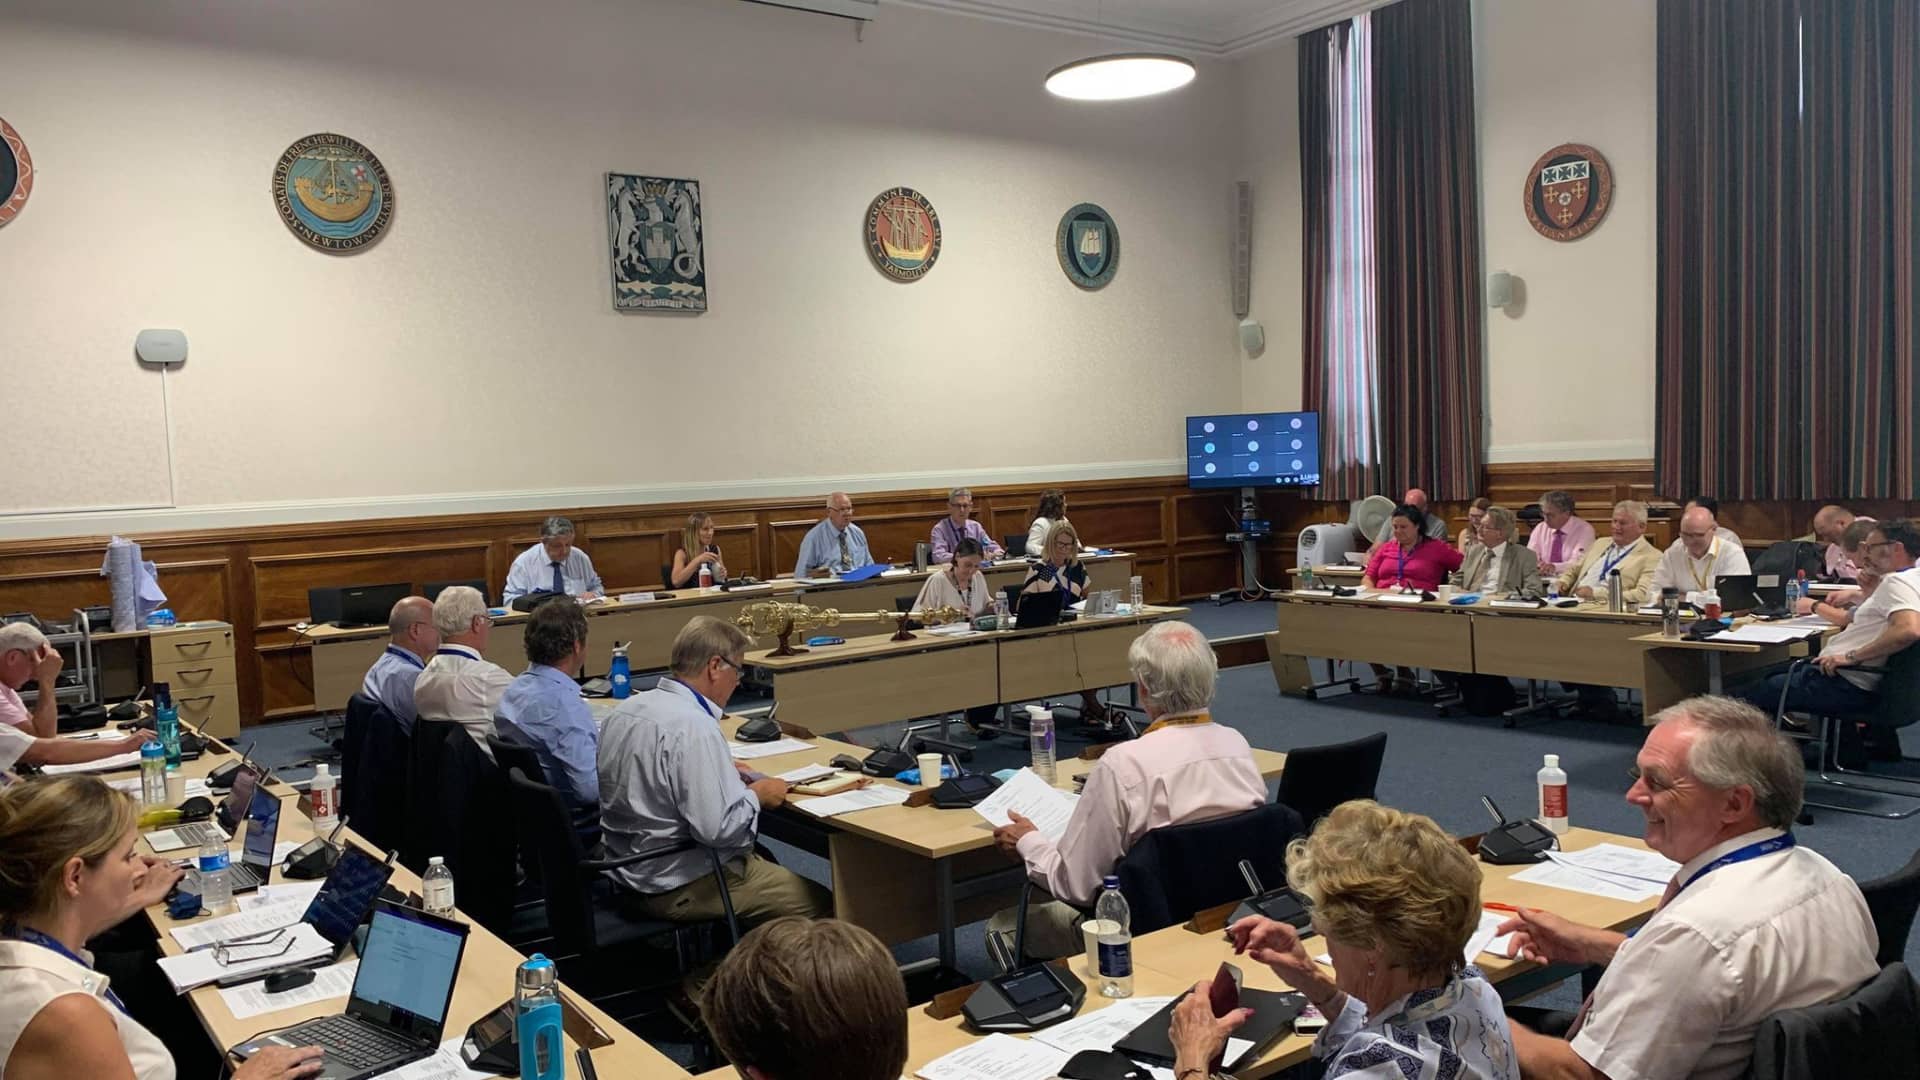 First non-socially distanced full council meeting